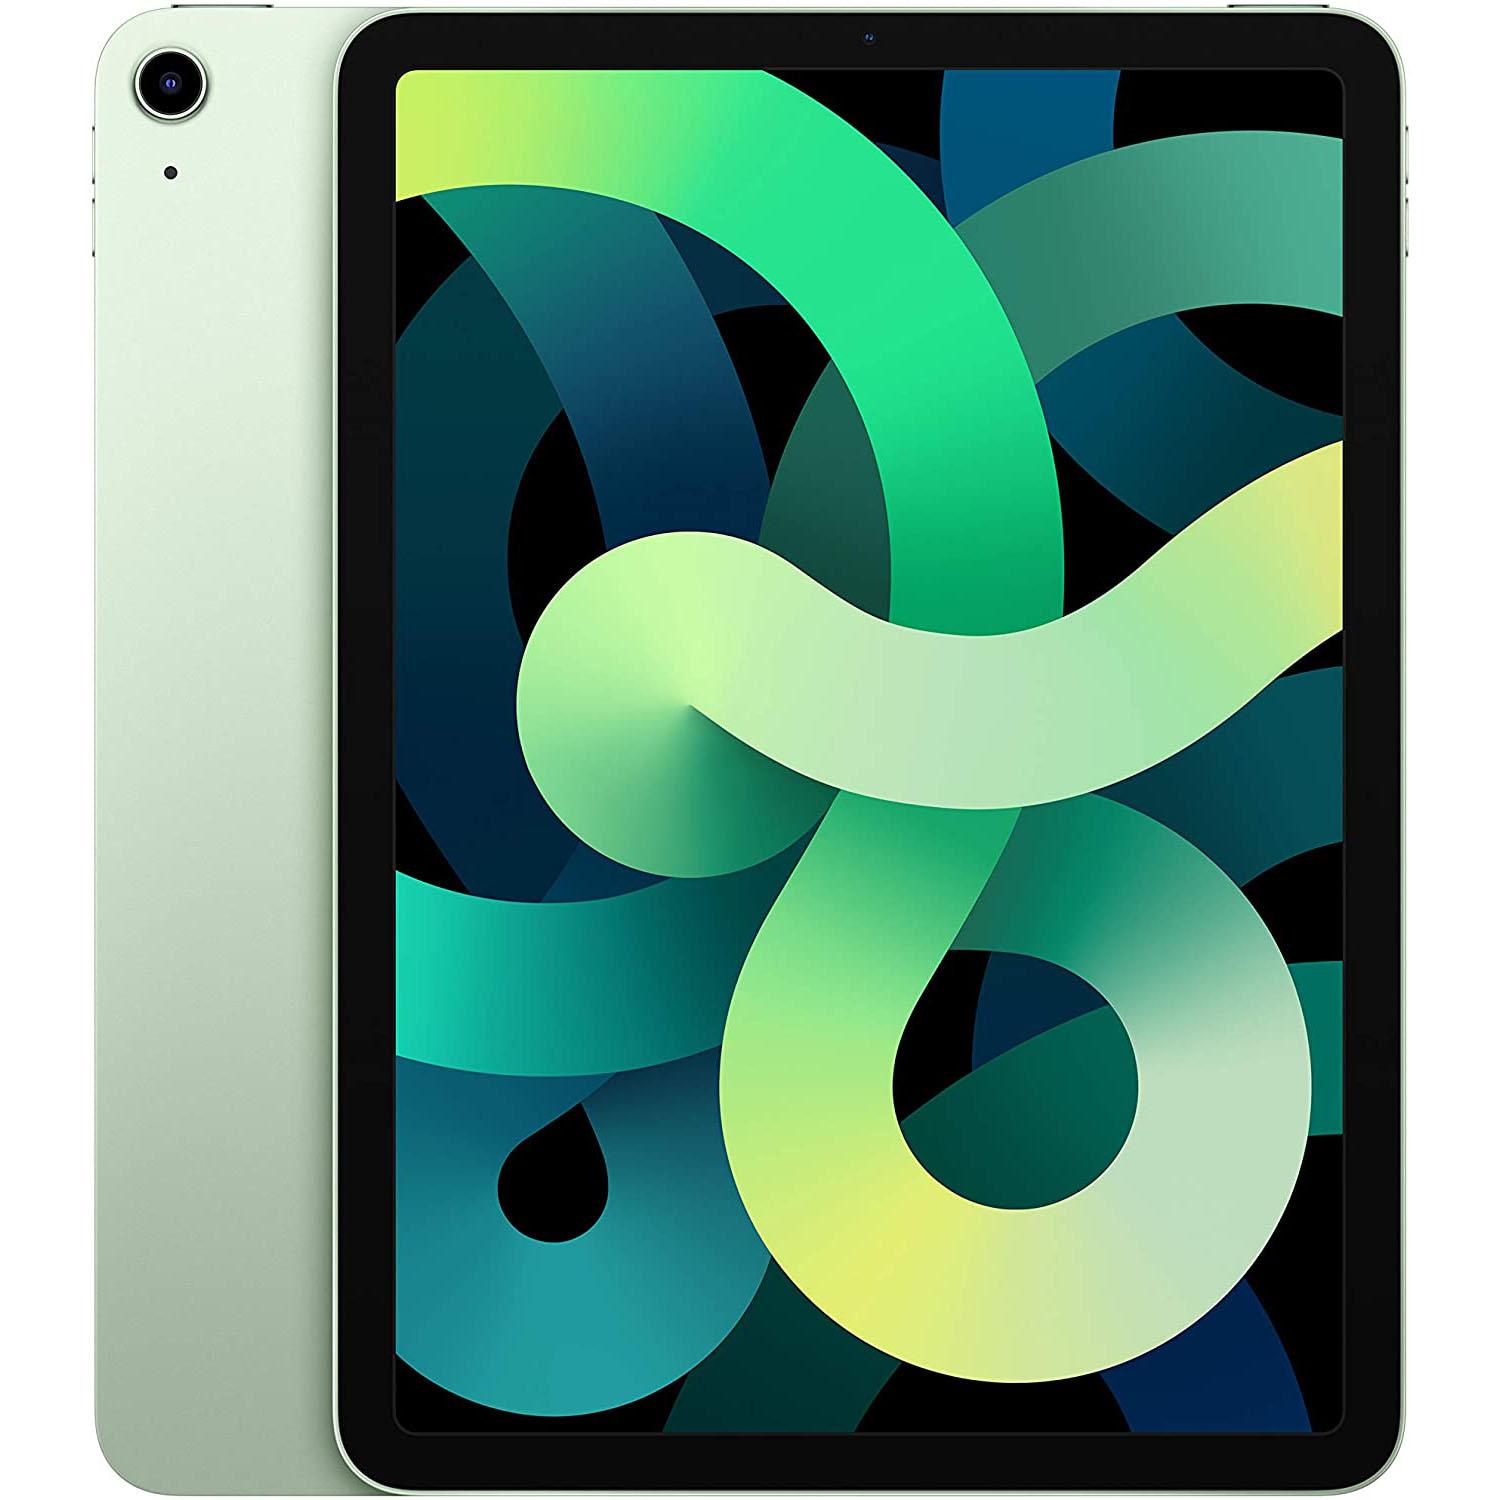 Price already dropped! Apple iPad Air Wifi Green Tablet Pre-Order for $559